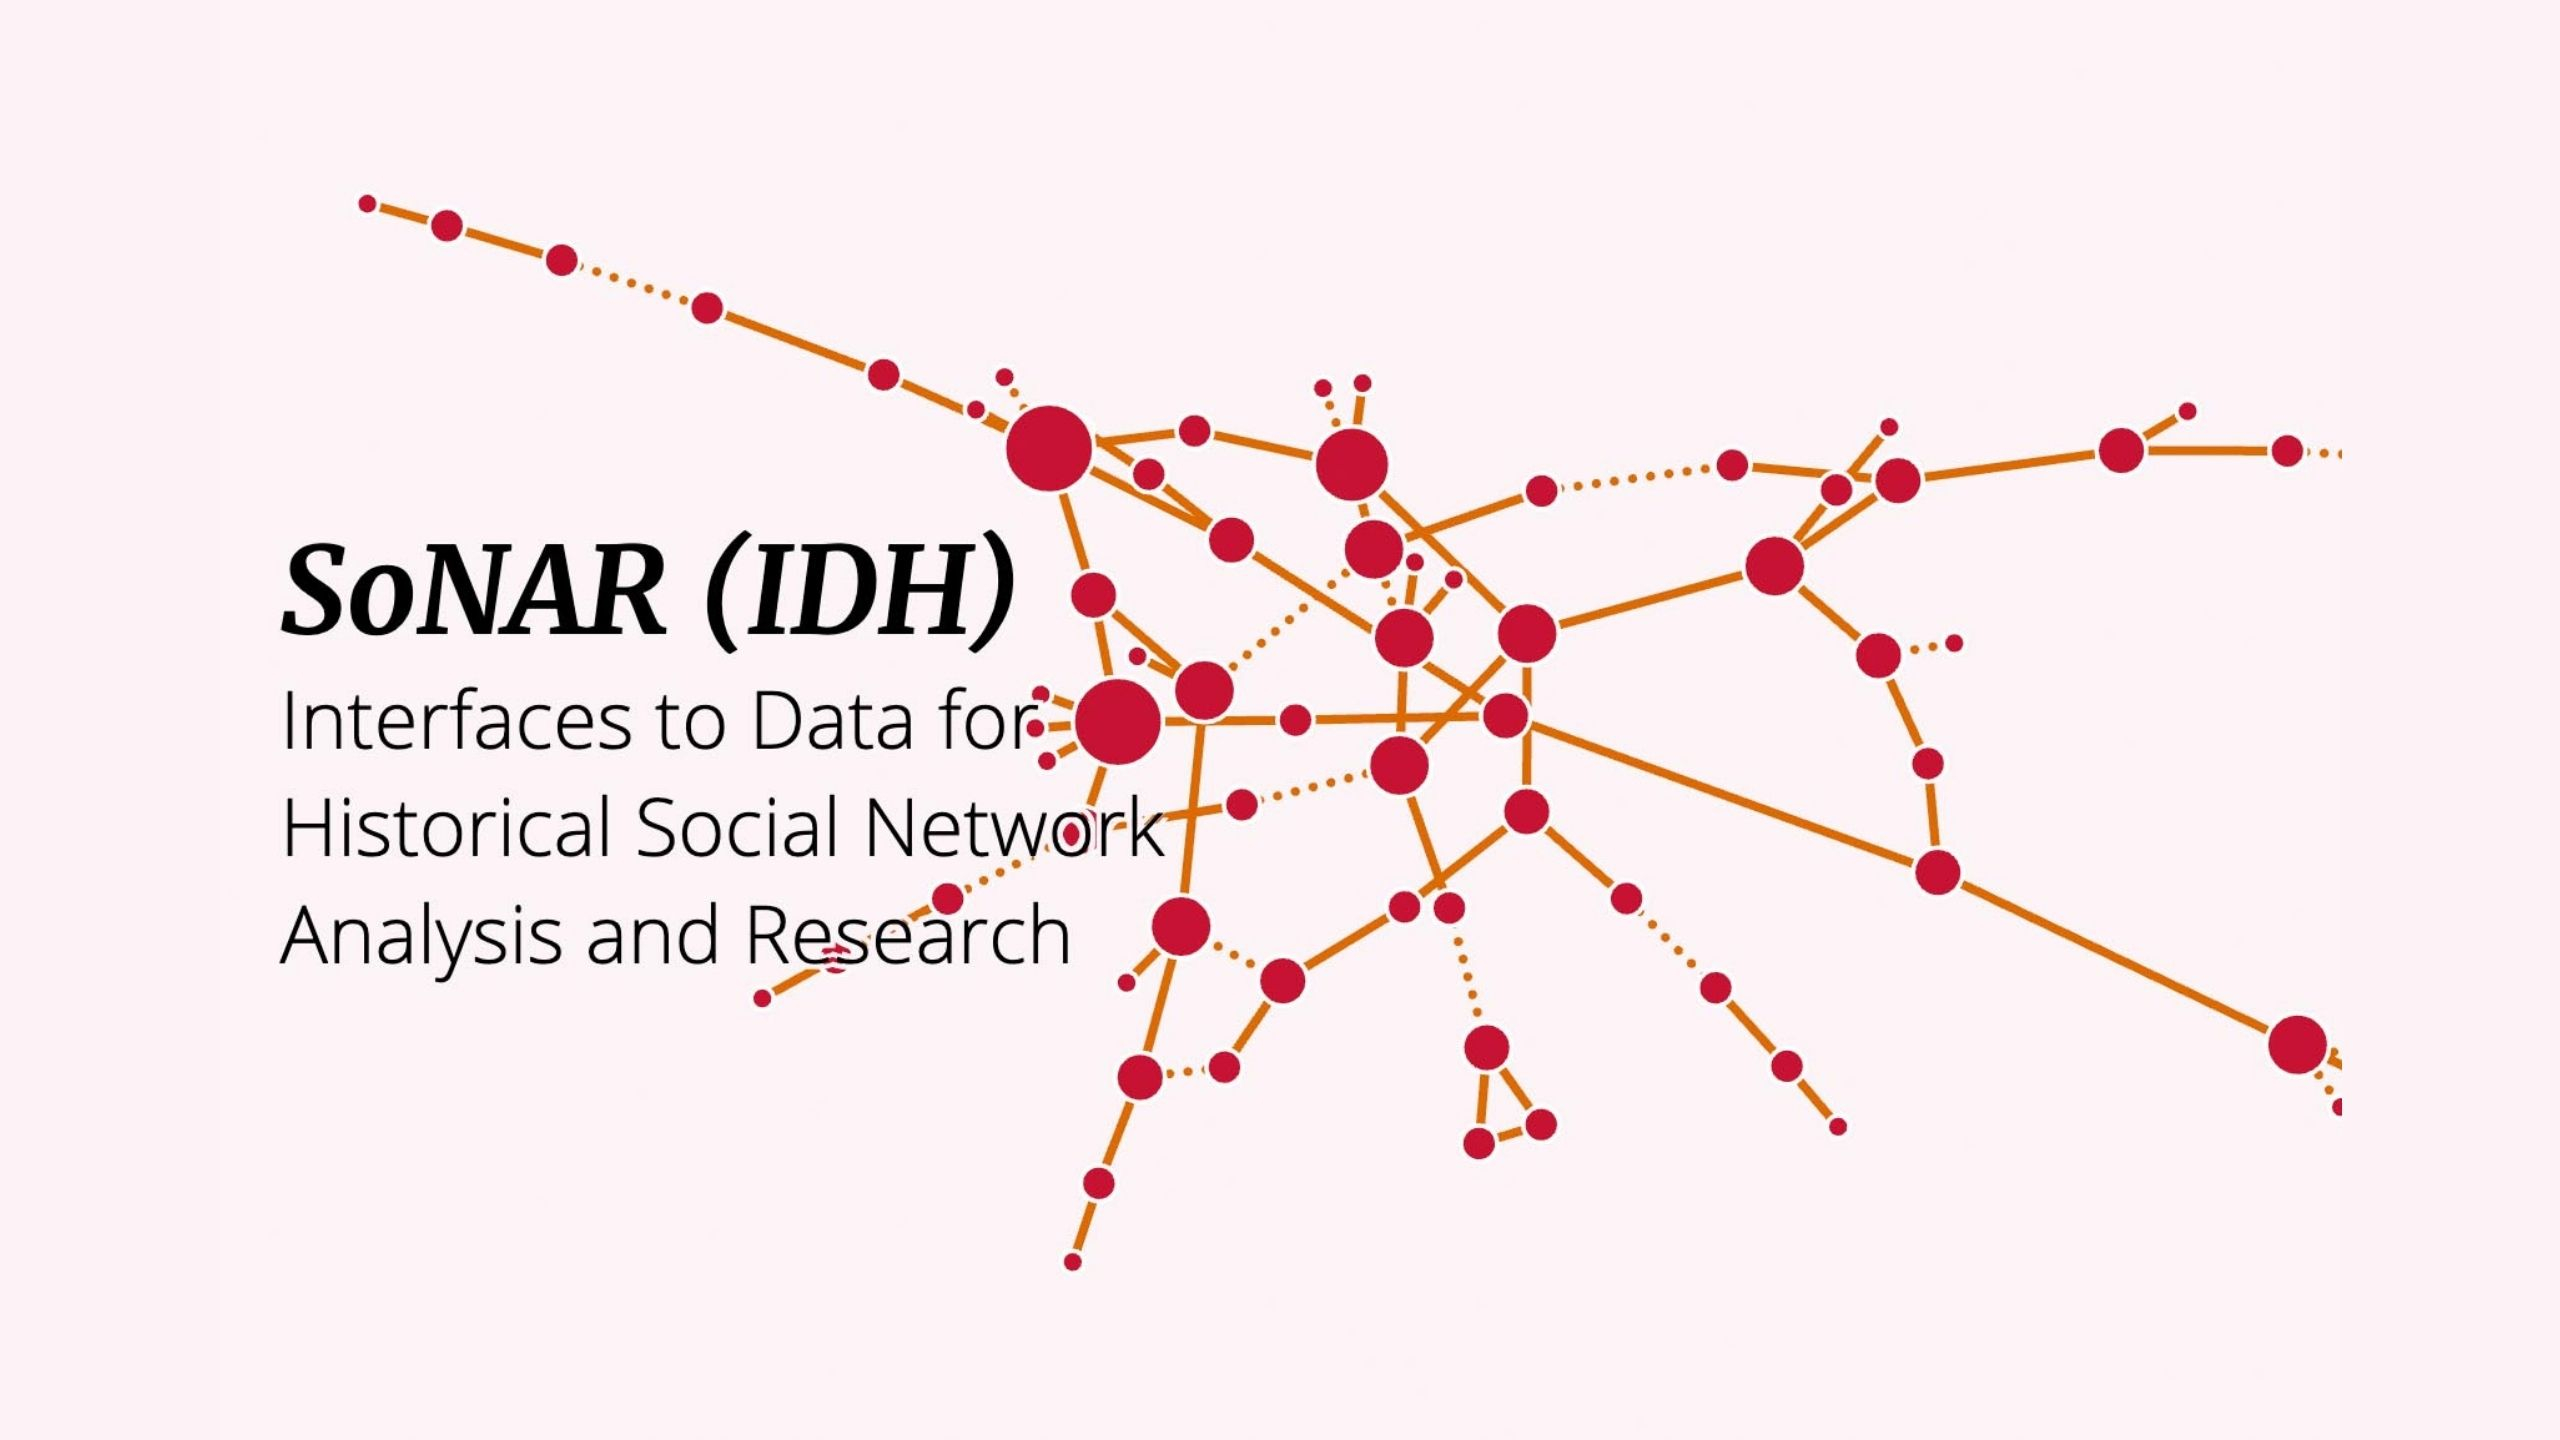 Logo des Forschungsprojekts "Interfaces to Data for Historical Social Network Analysis and Research"